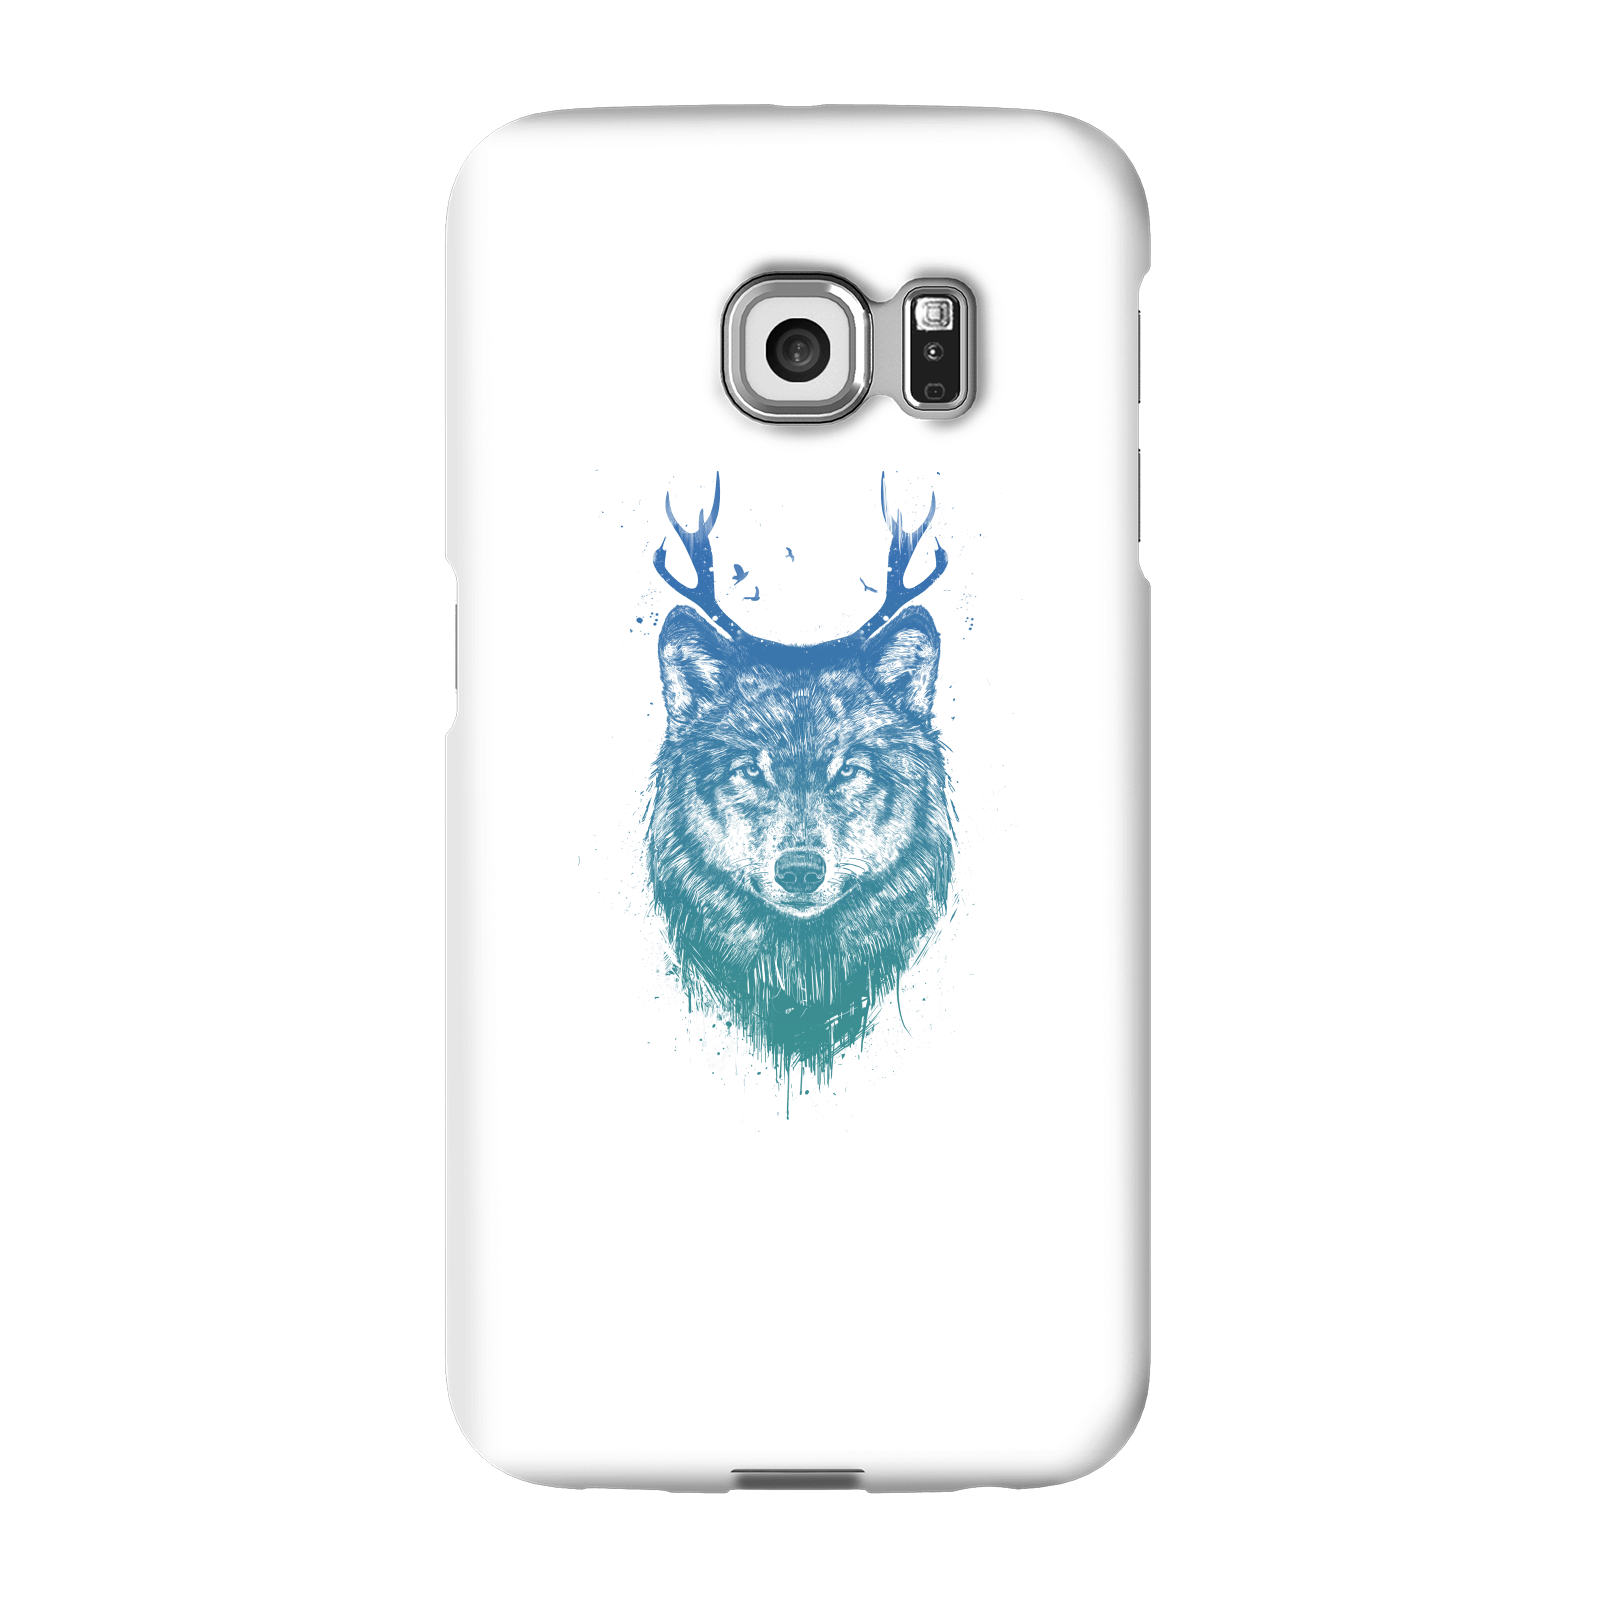 balazs solti wolf phone case for iphone and android - samsung s6 edge plus - snap case - gloss